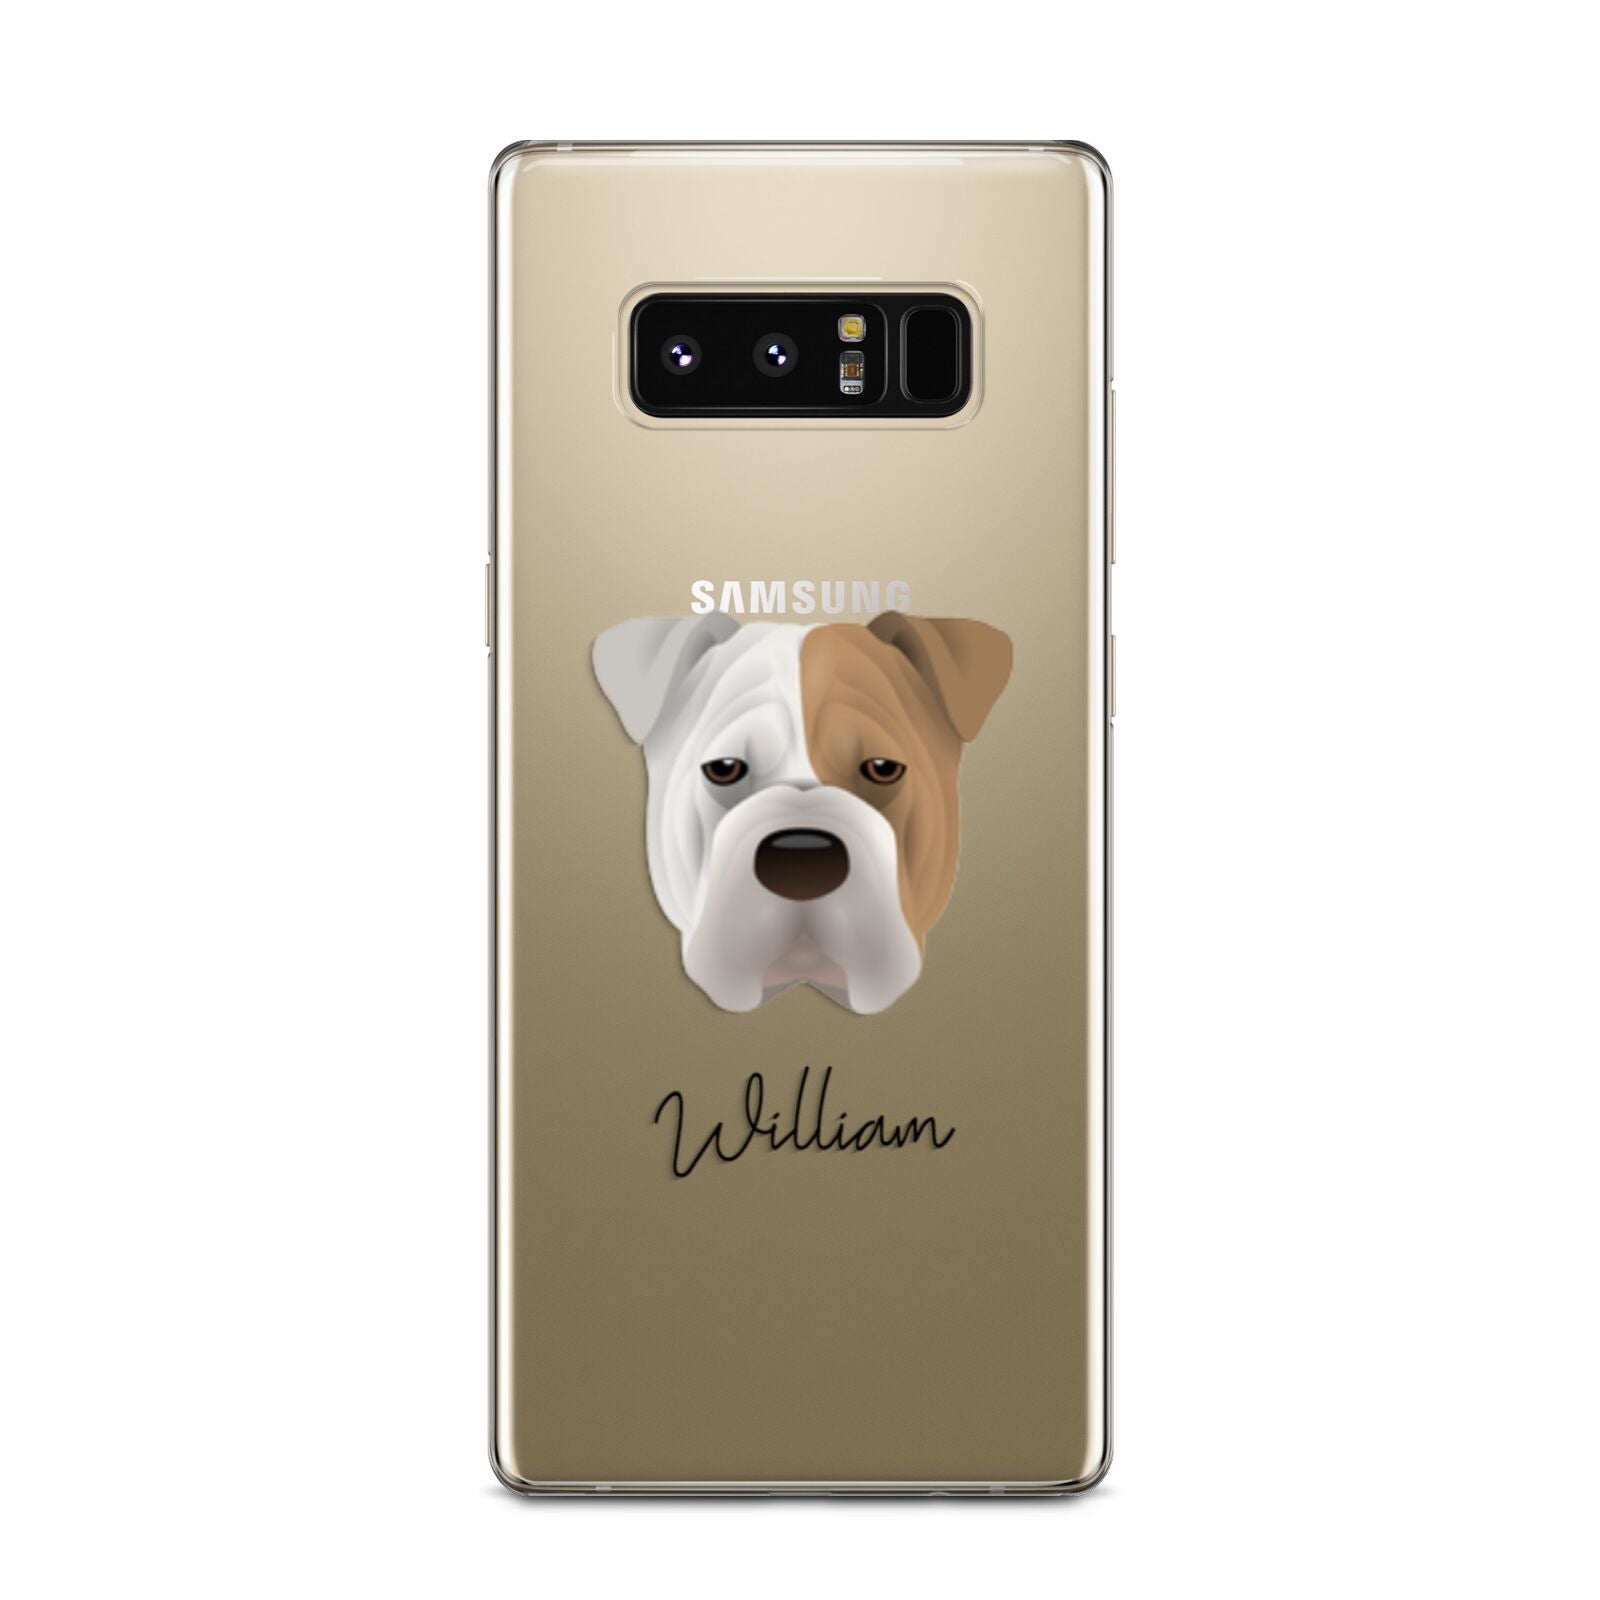 Bull Pei Personalised Samsung Galaxy Note 8 Case